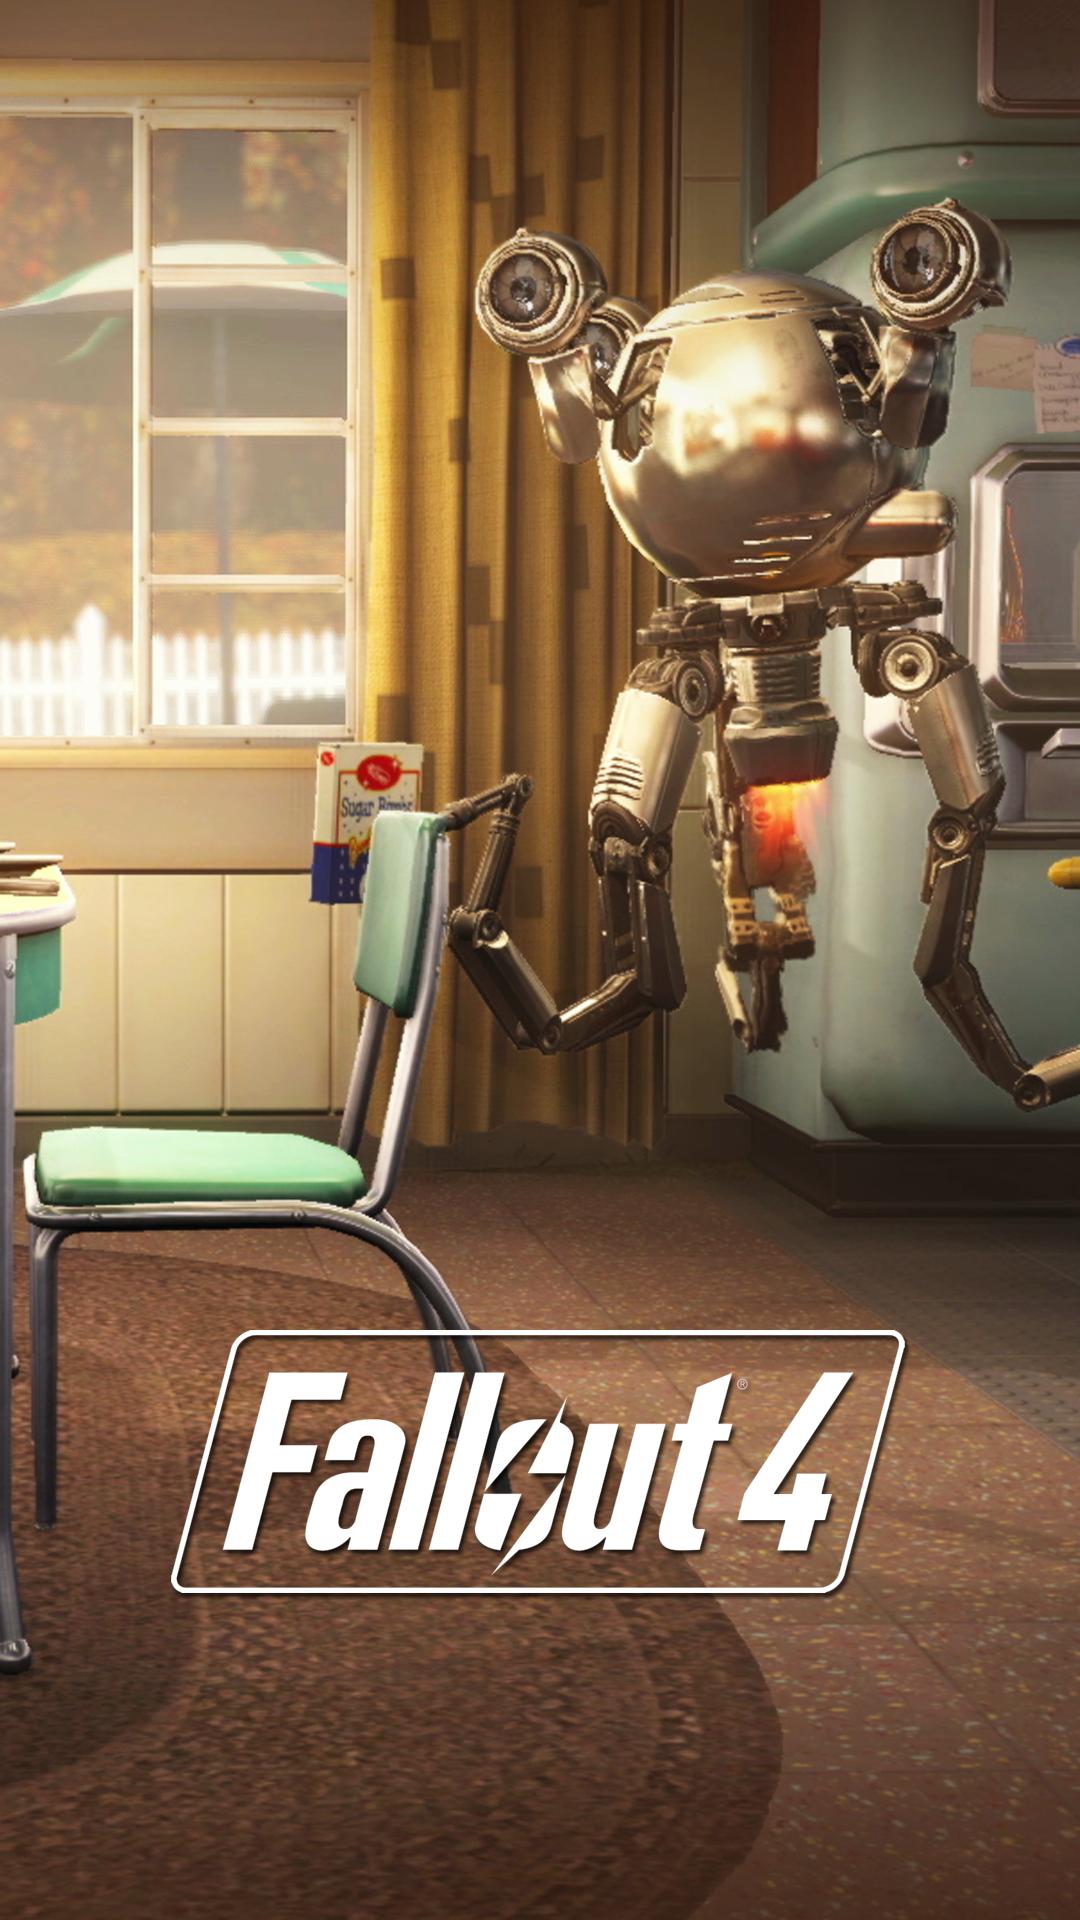 Put Fallout 4 on your phone with these lock screen wallpaper